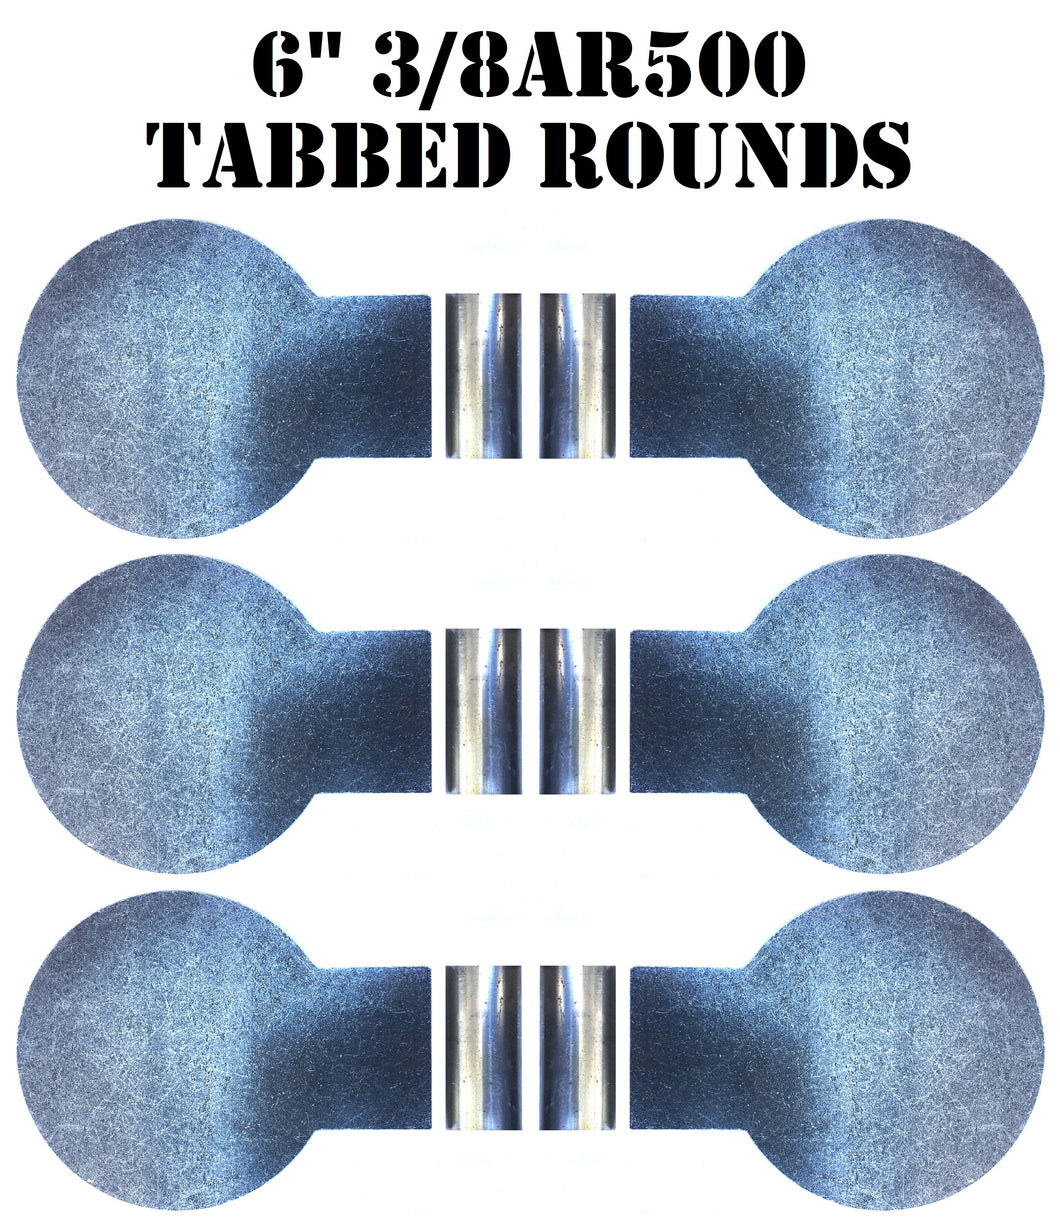 Magnum Target Six 6in AR500 Steel Target Tabbed Rounds for Plate Racks, Dueling Trees & Swingers w/ Tubes - TR66AR500T